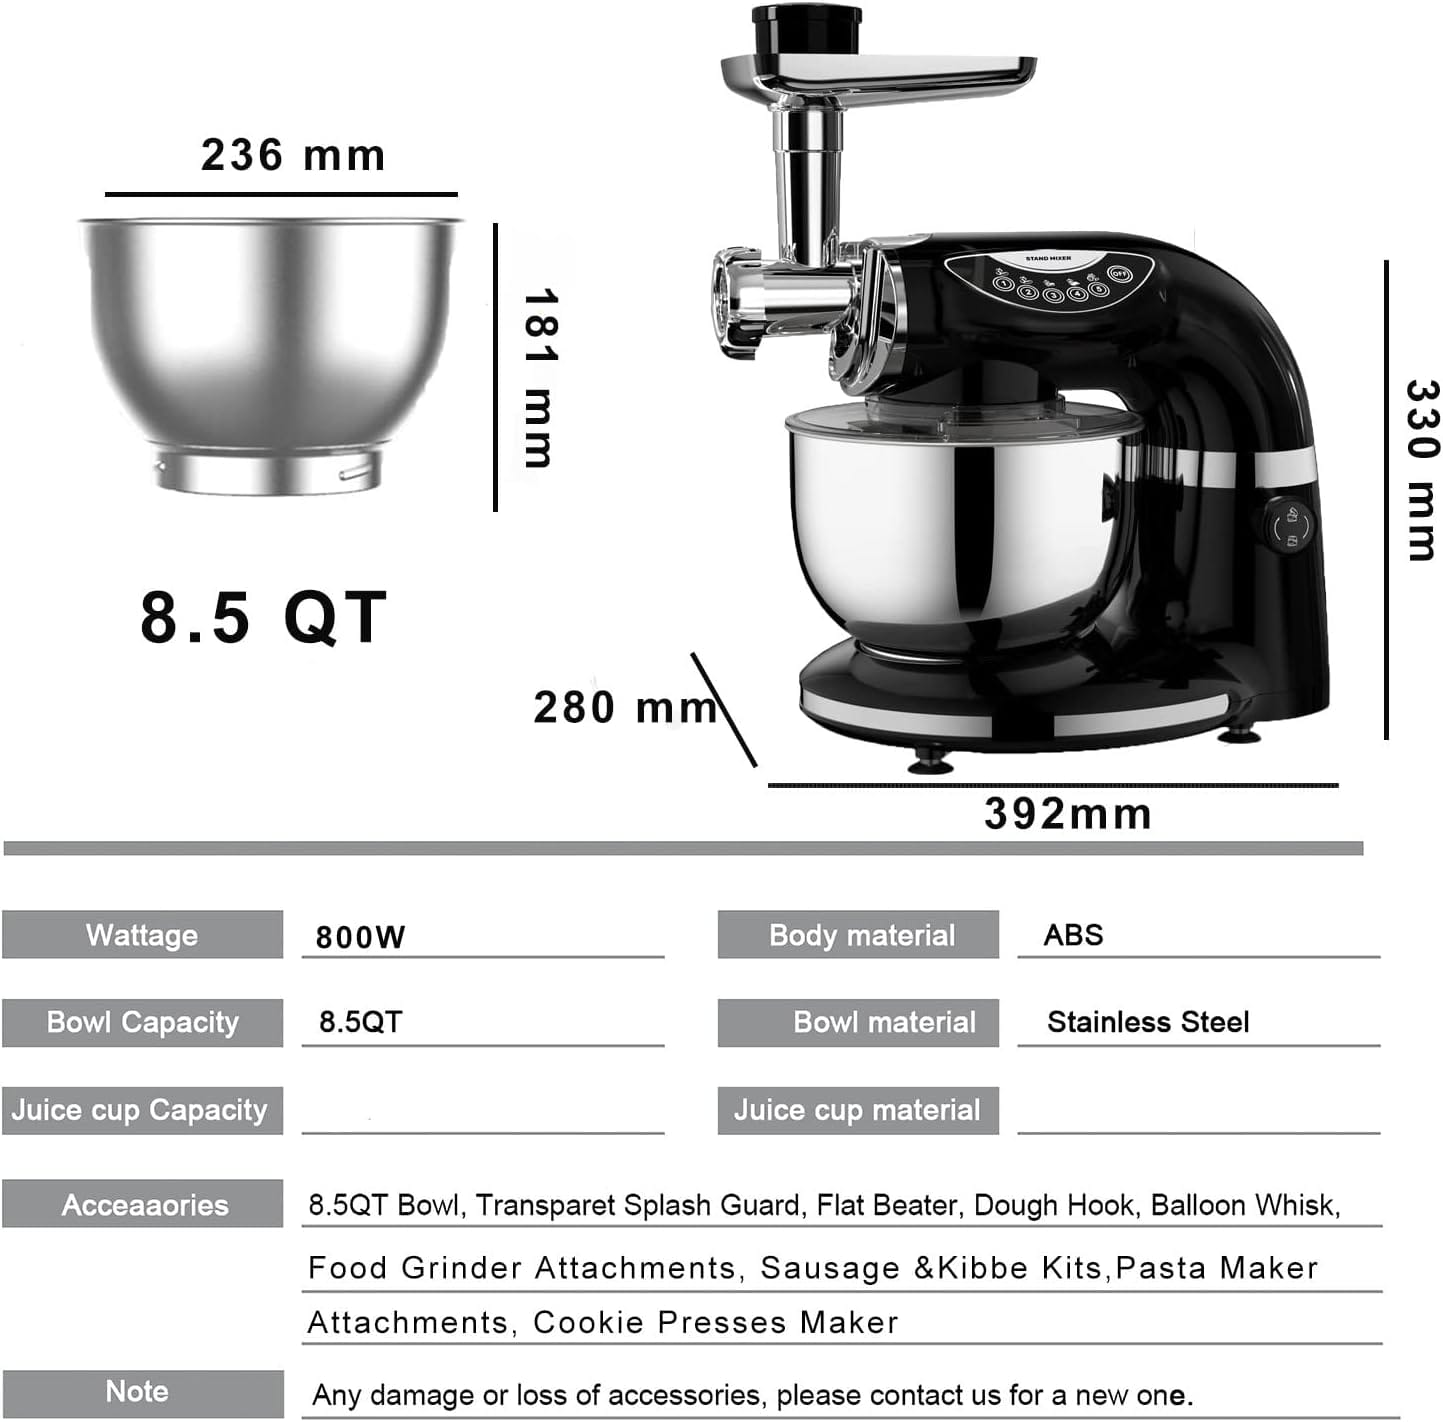 Aifeel Stand Mixer 800W, 8.5QT Bowl, 7 in 1 Multifunctional Kitchen Mixer with Dough Hook, Whisk, Beater, Meat Grinder,Pasta  Cookie Maker-Black